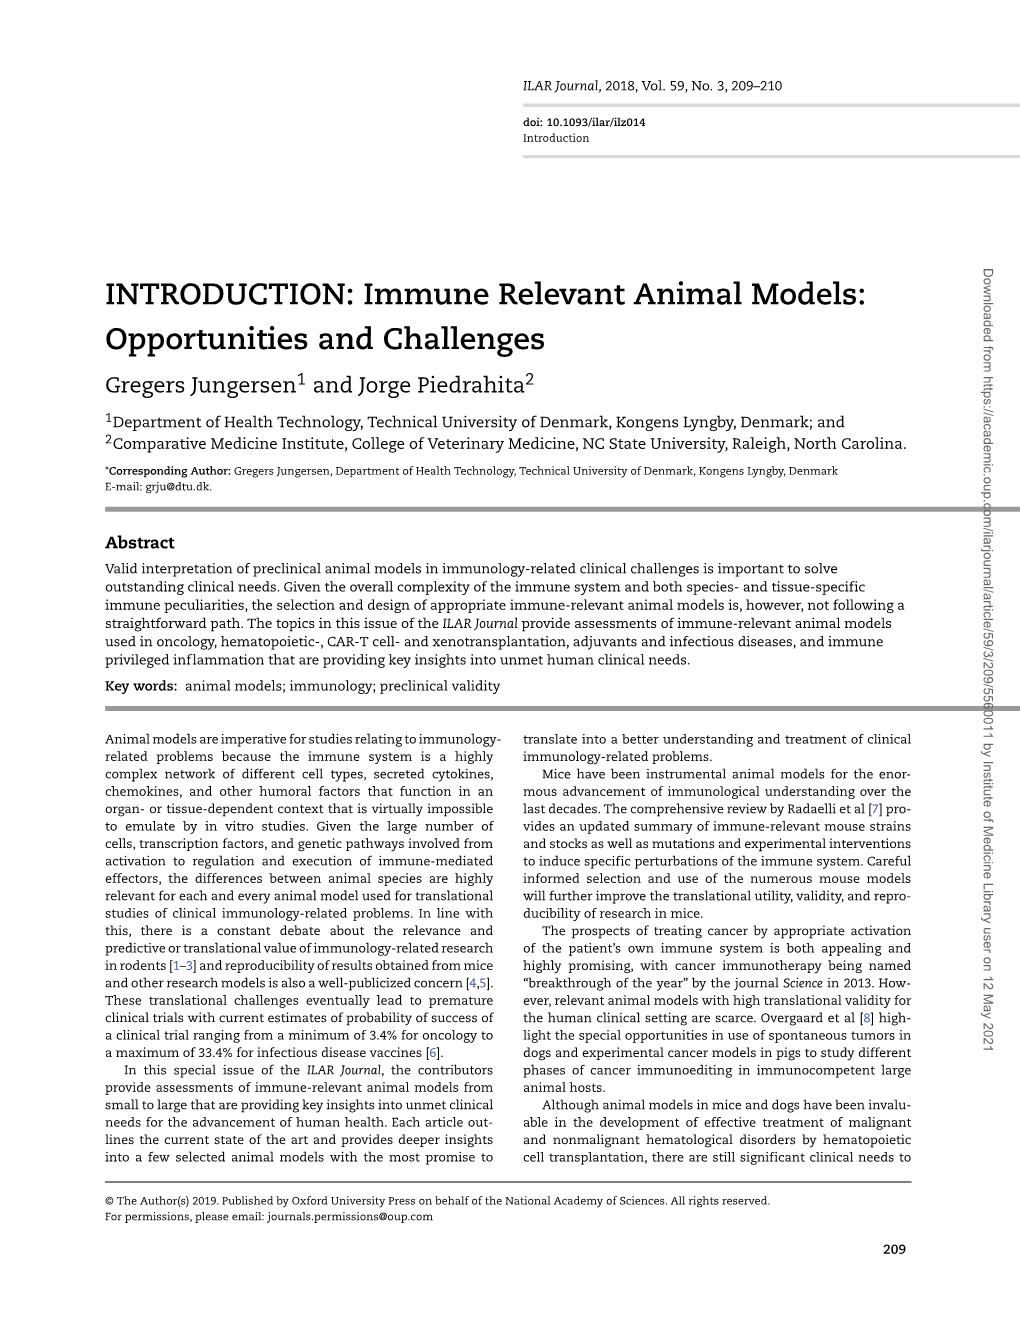 Immune Relevant Animal Models: Opportunities and Challenges Gregers Jungersen1 and Jorge Piedrahita2